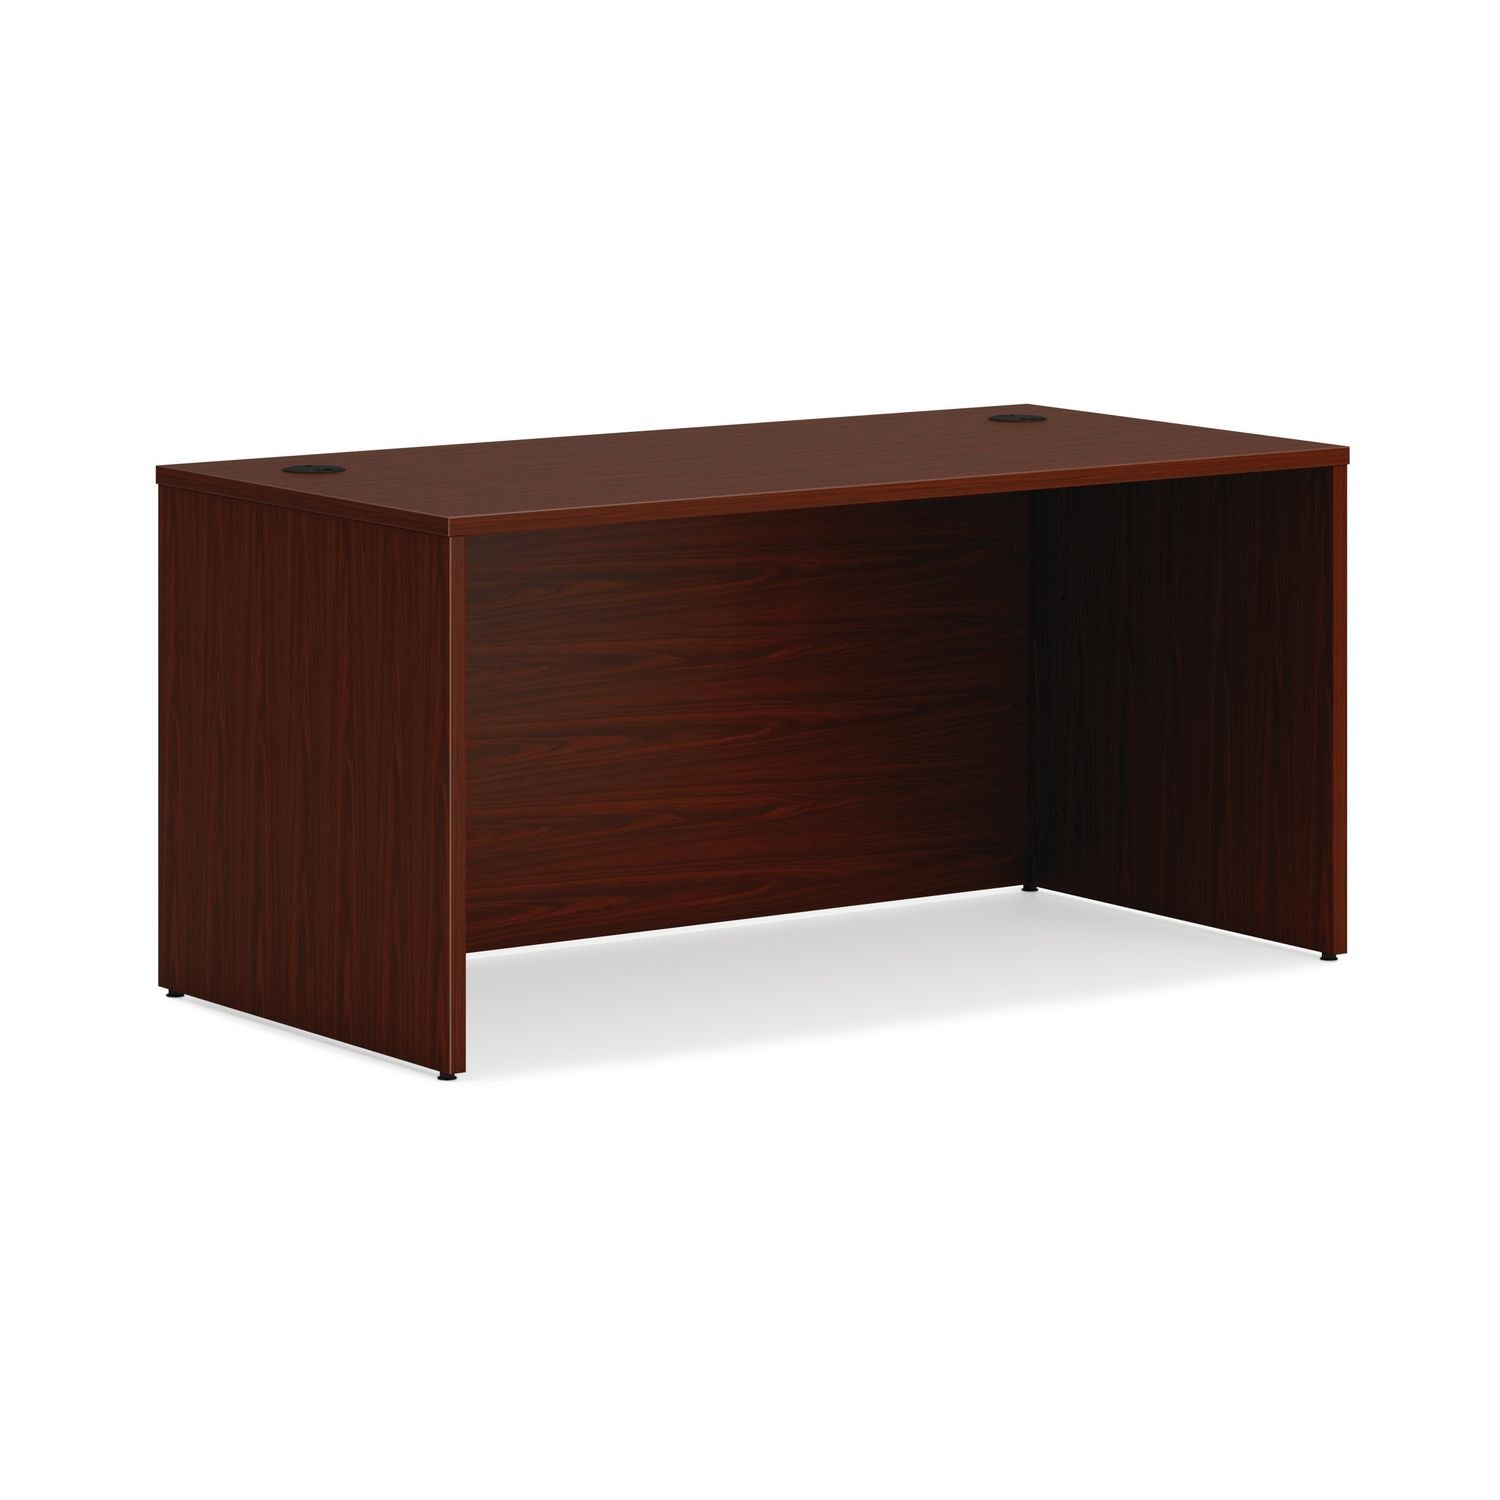 mod-double-pedestal-desk-bundle-60-x-30-x-29-traditional-mahogany-ships-in-7-10-business-days_honmod178 - 2